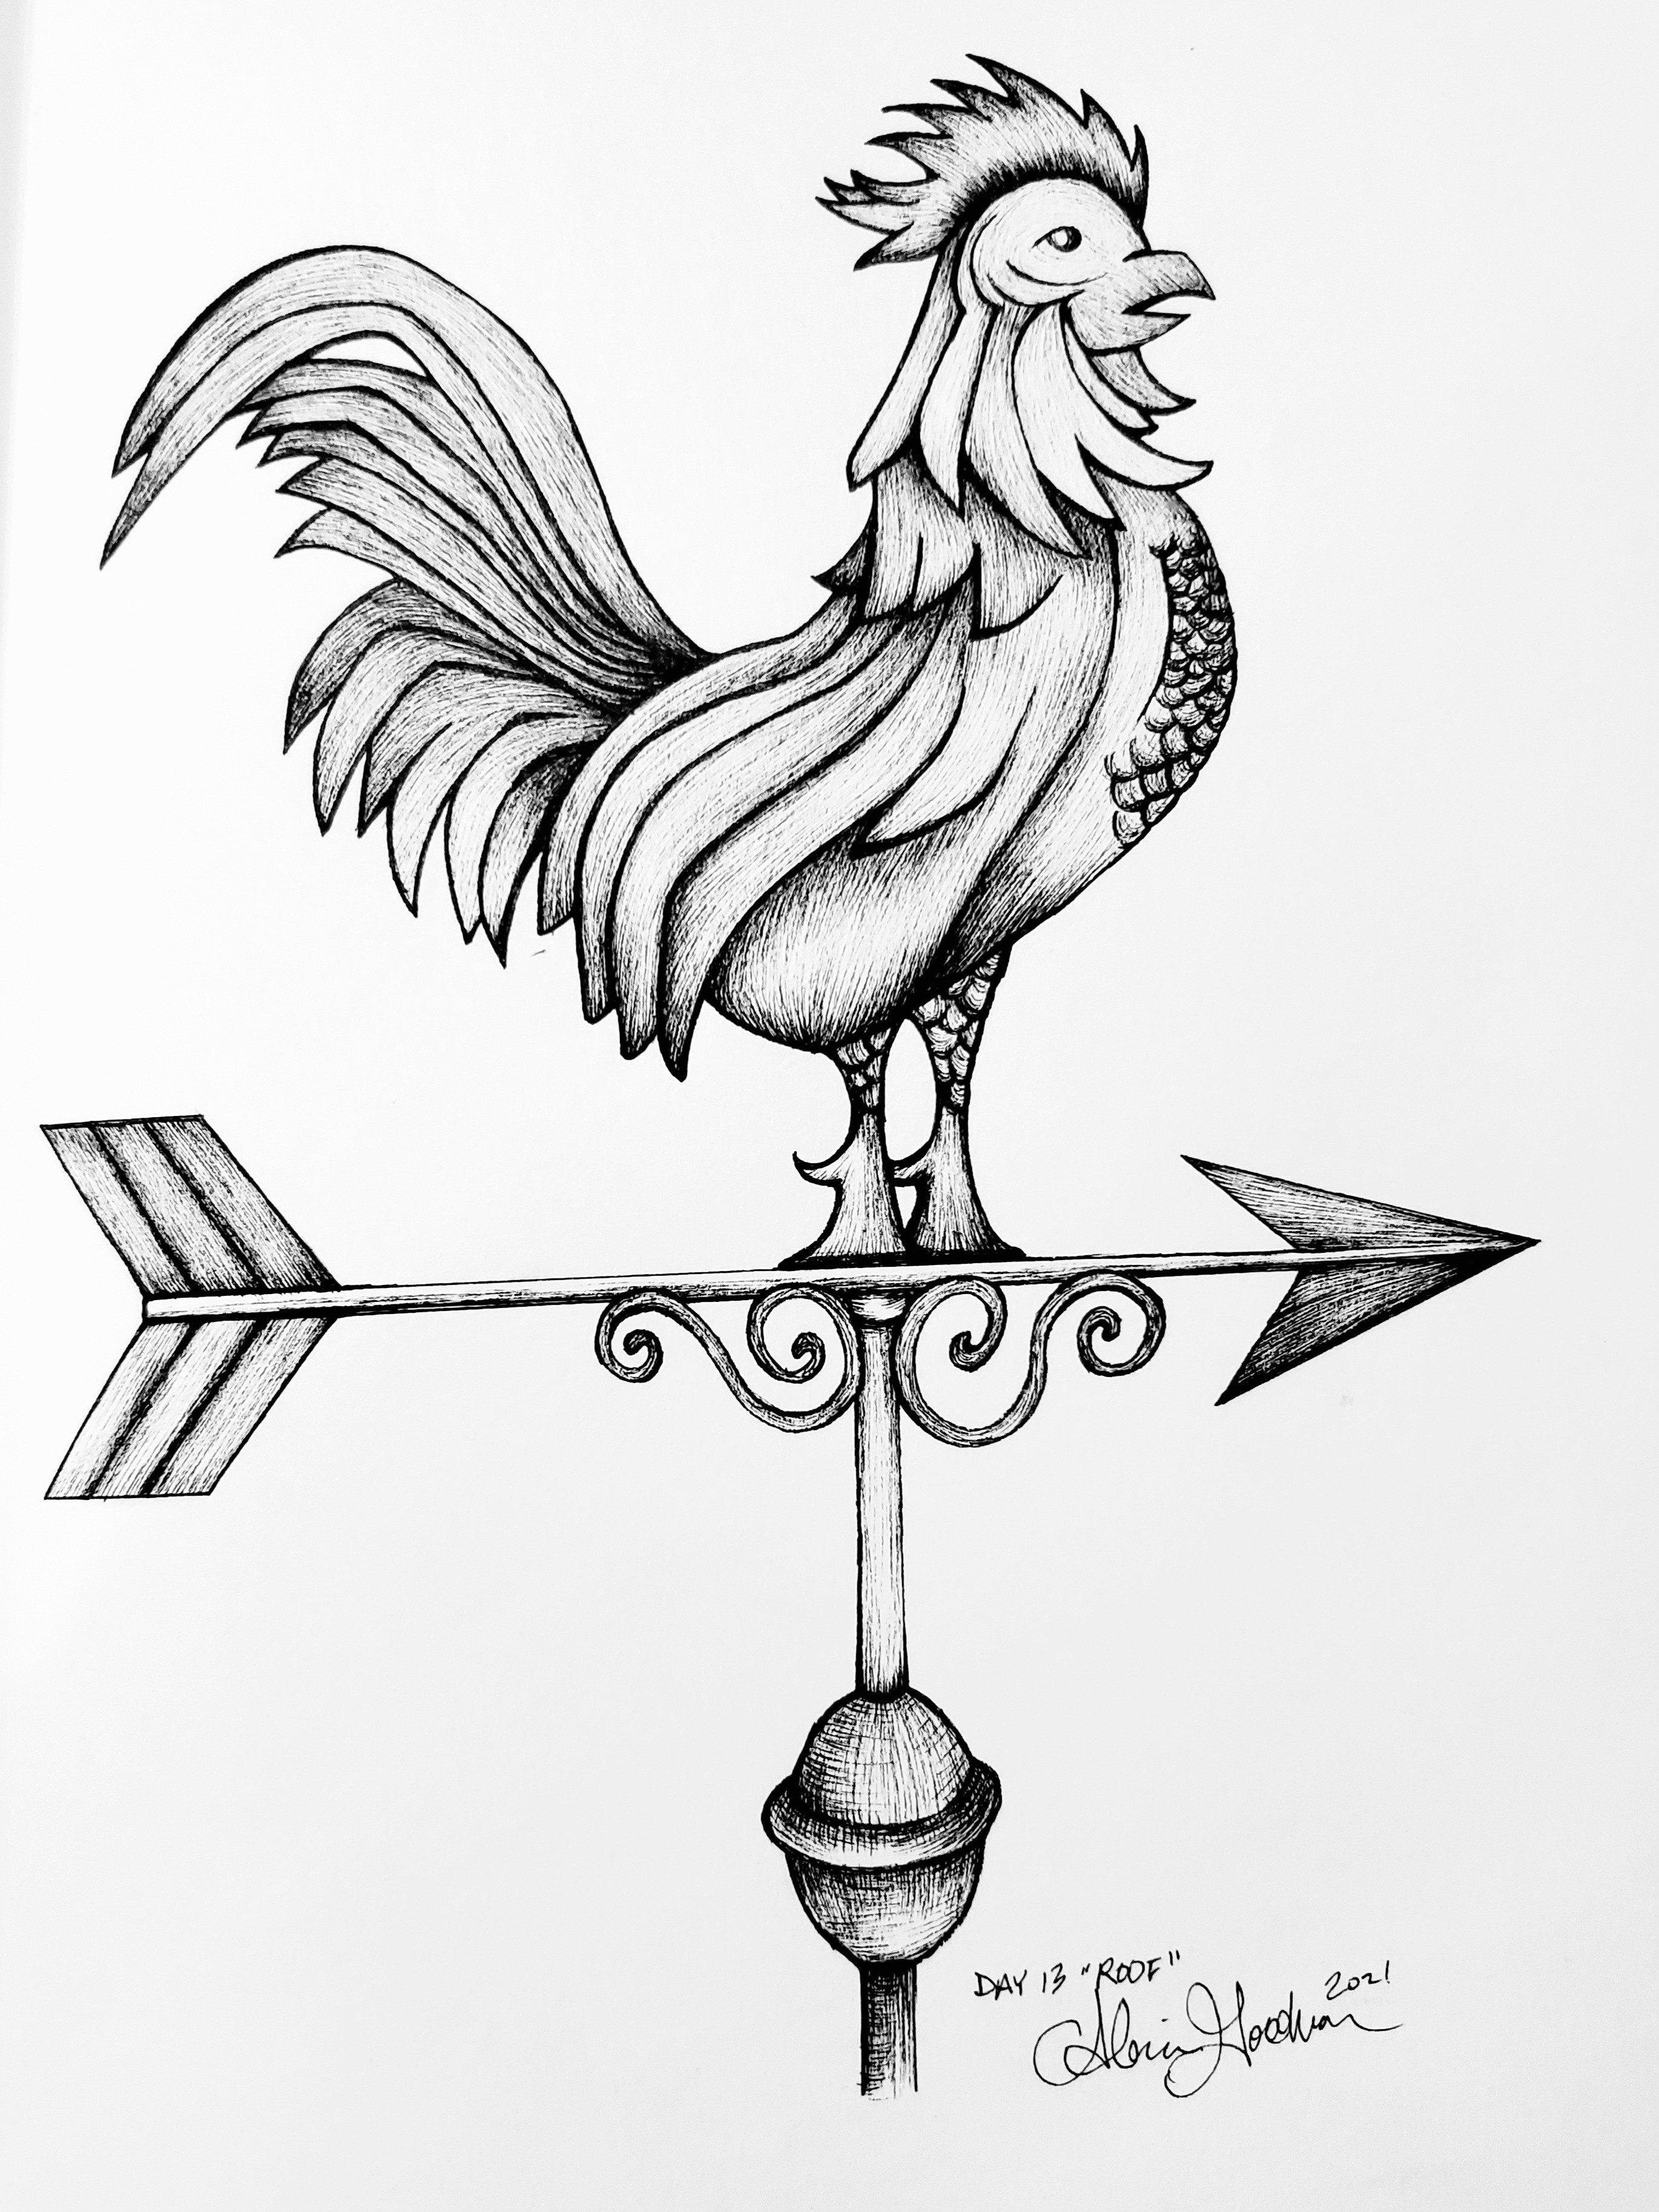 Inktober Day 12 Roof ink drawing of weather vane rooster by alecia goodman copyright 2021 to present 